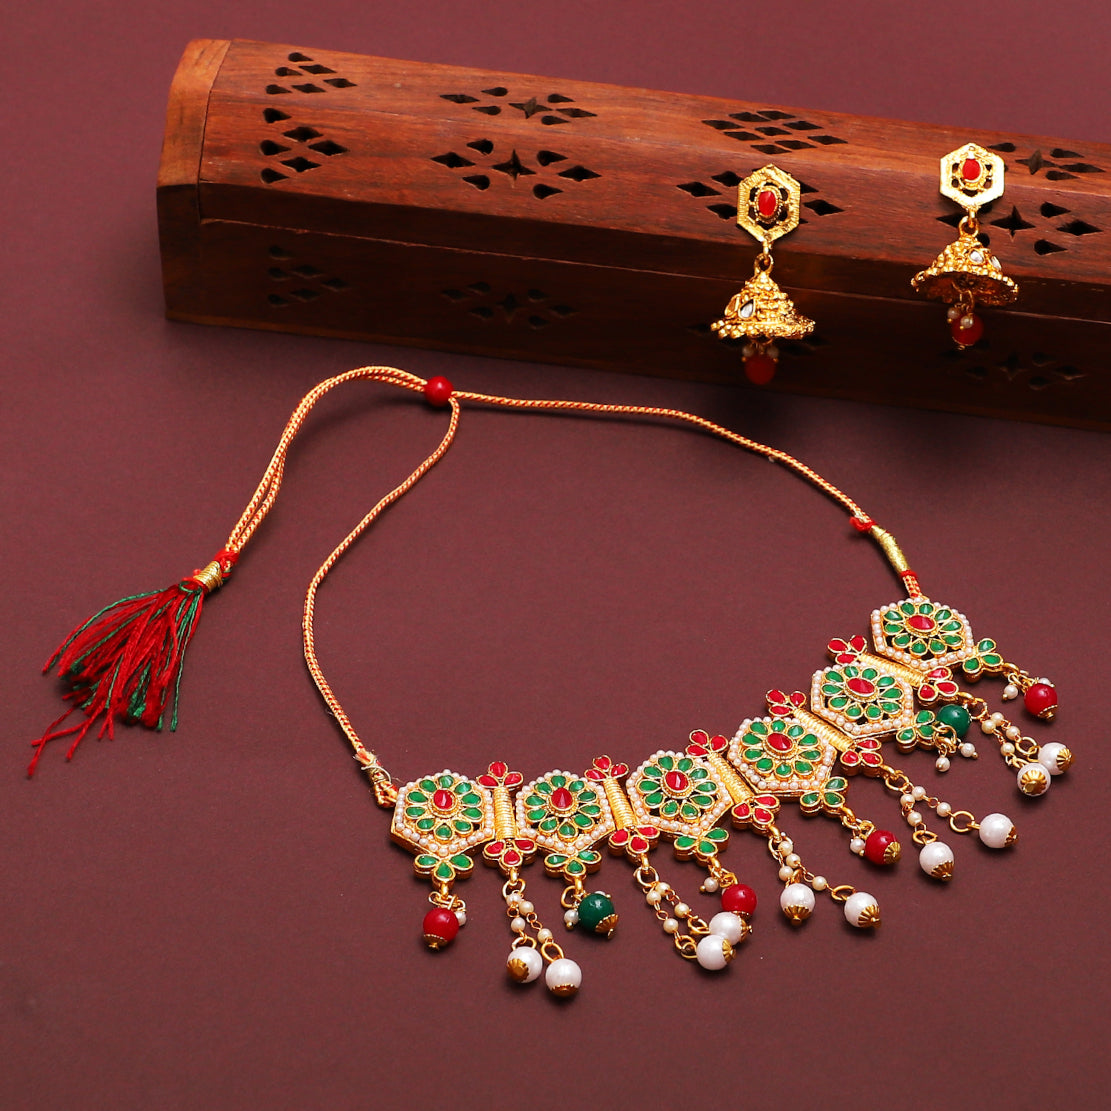  Best Traditional Handcrafted Designed by Mekkna of Necklace with Earrings for Women | Buy This Necklace Online from Mekkna